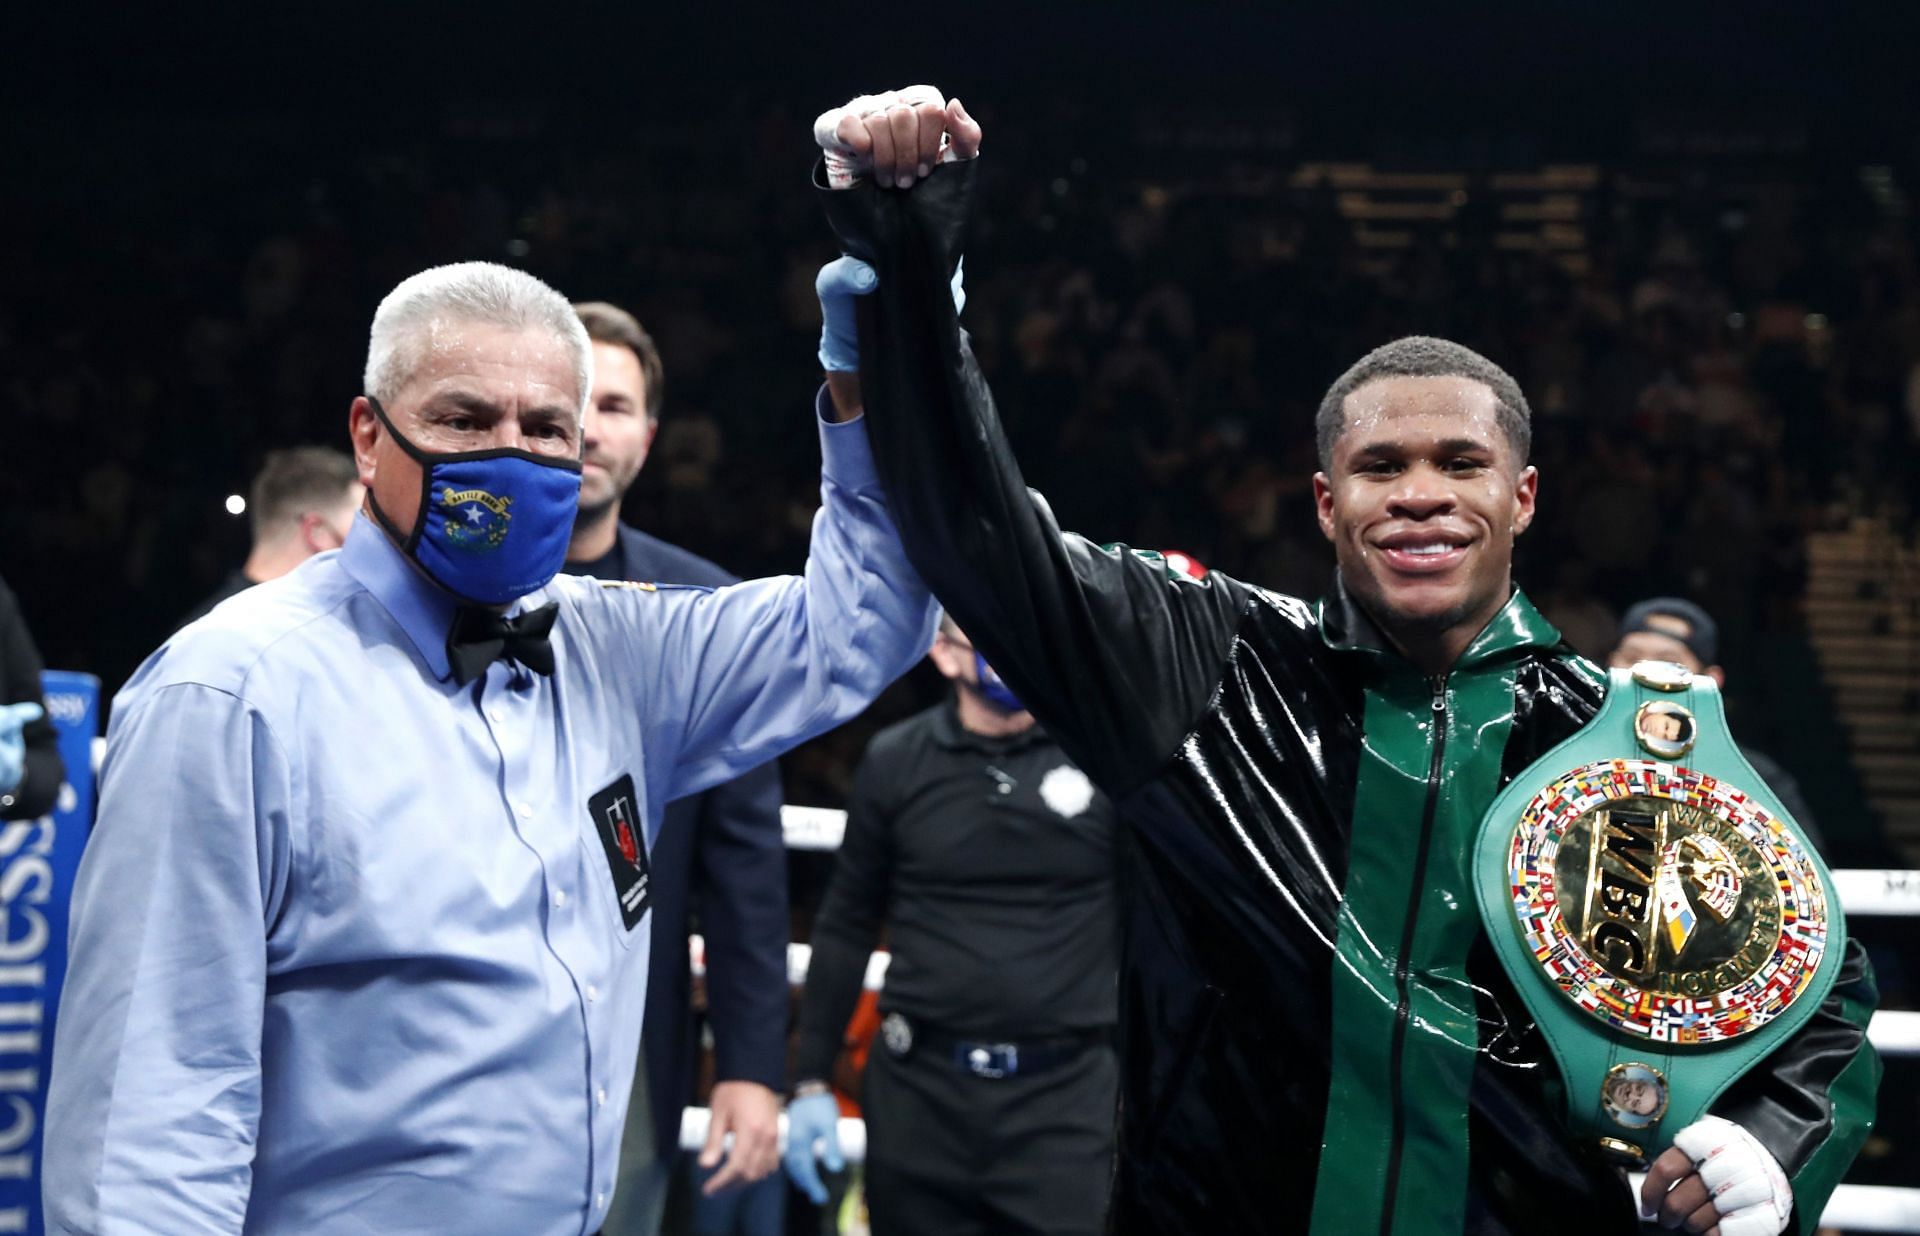 Devin Haney with his belt after beating Joseph Diaz Jr.